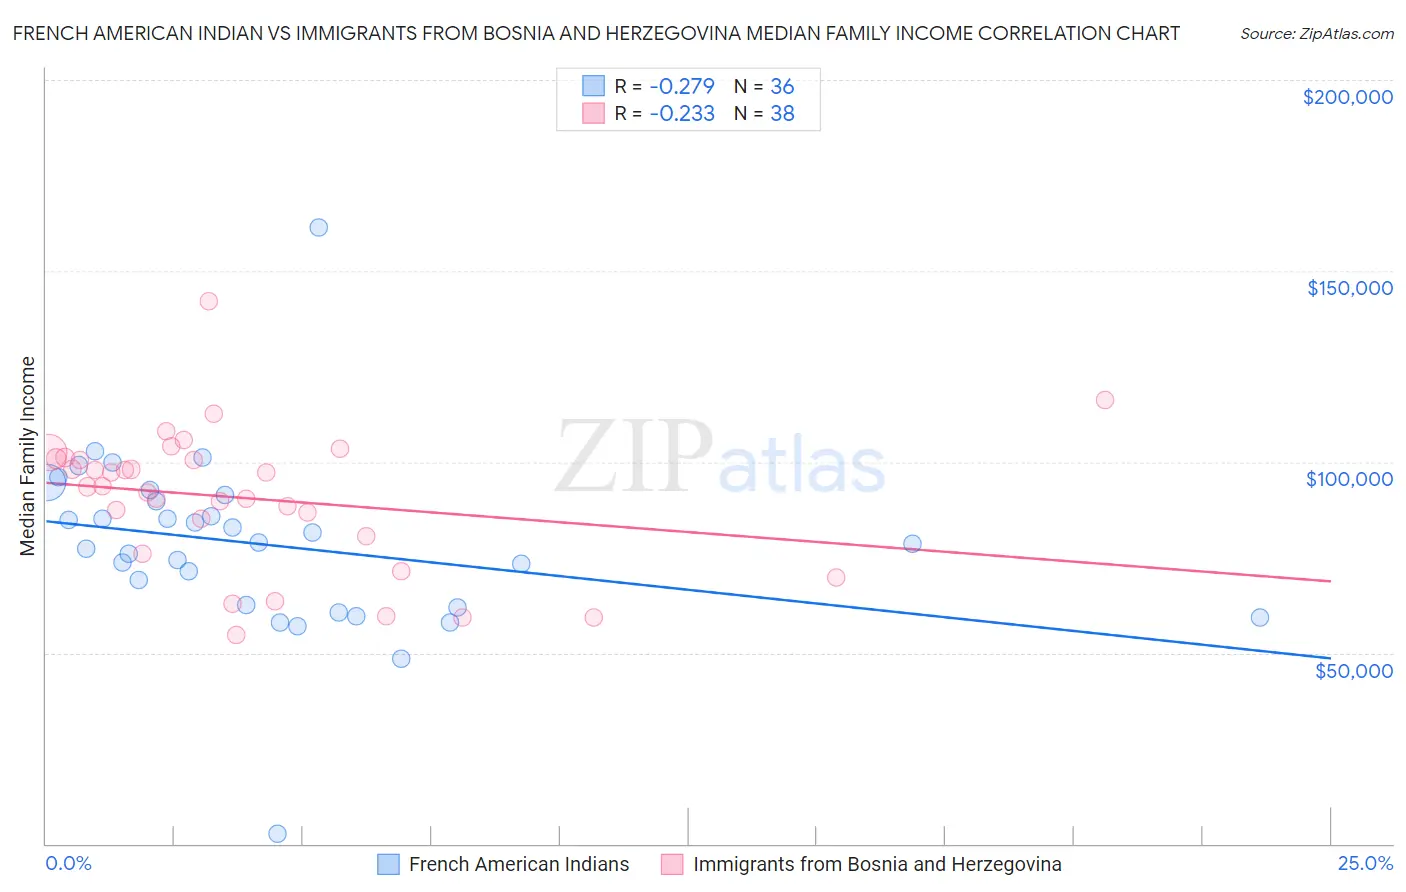 French American Indian vs Immigrants from Bosnia and Herzegovina Median Family Income